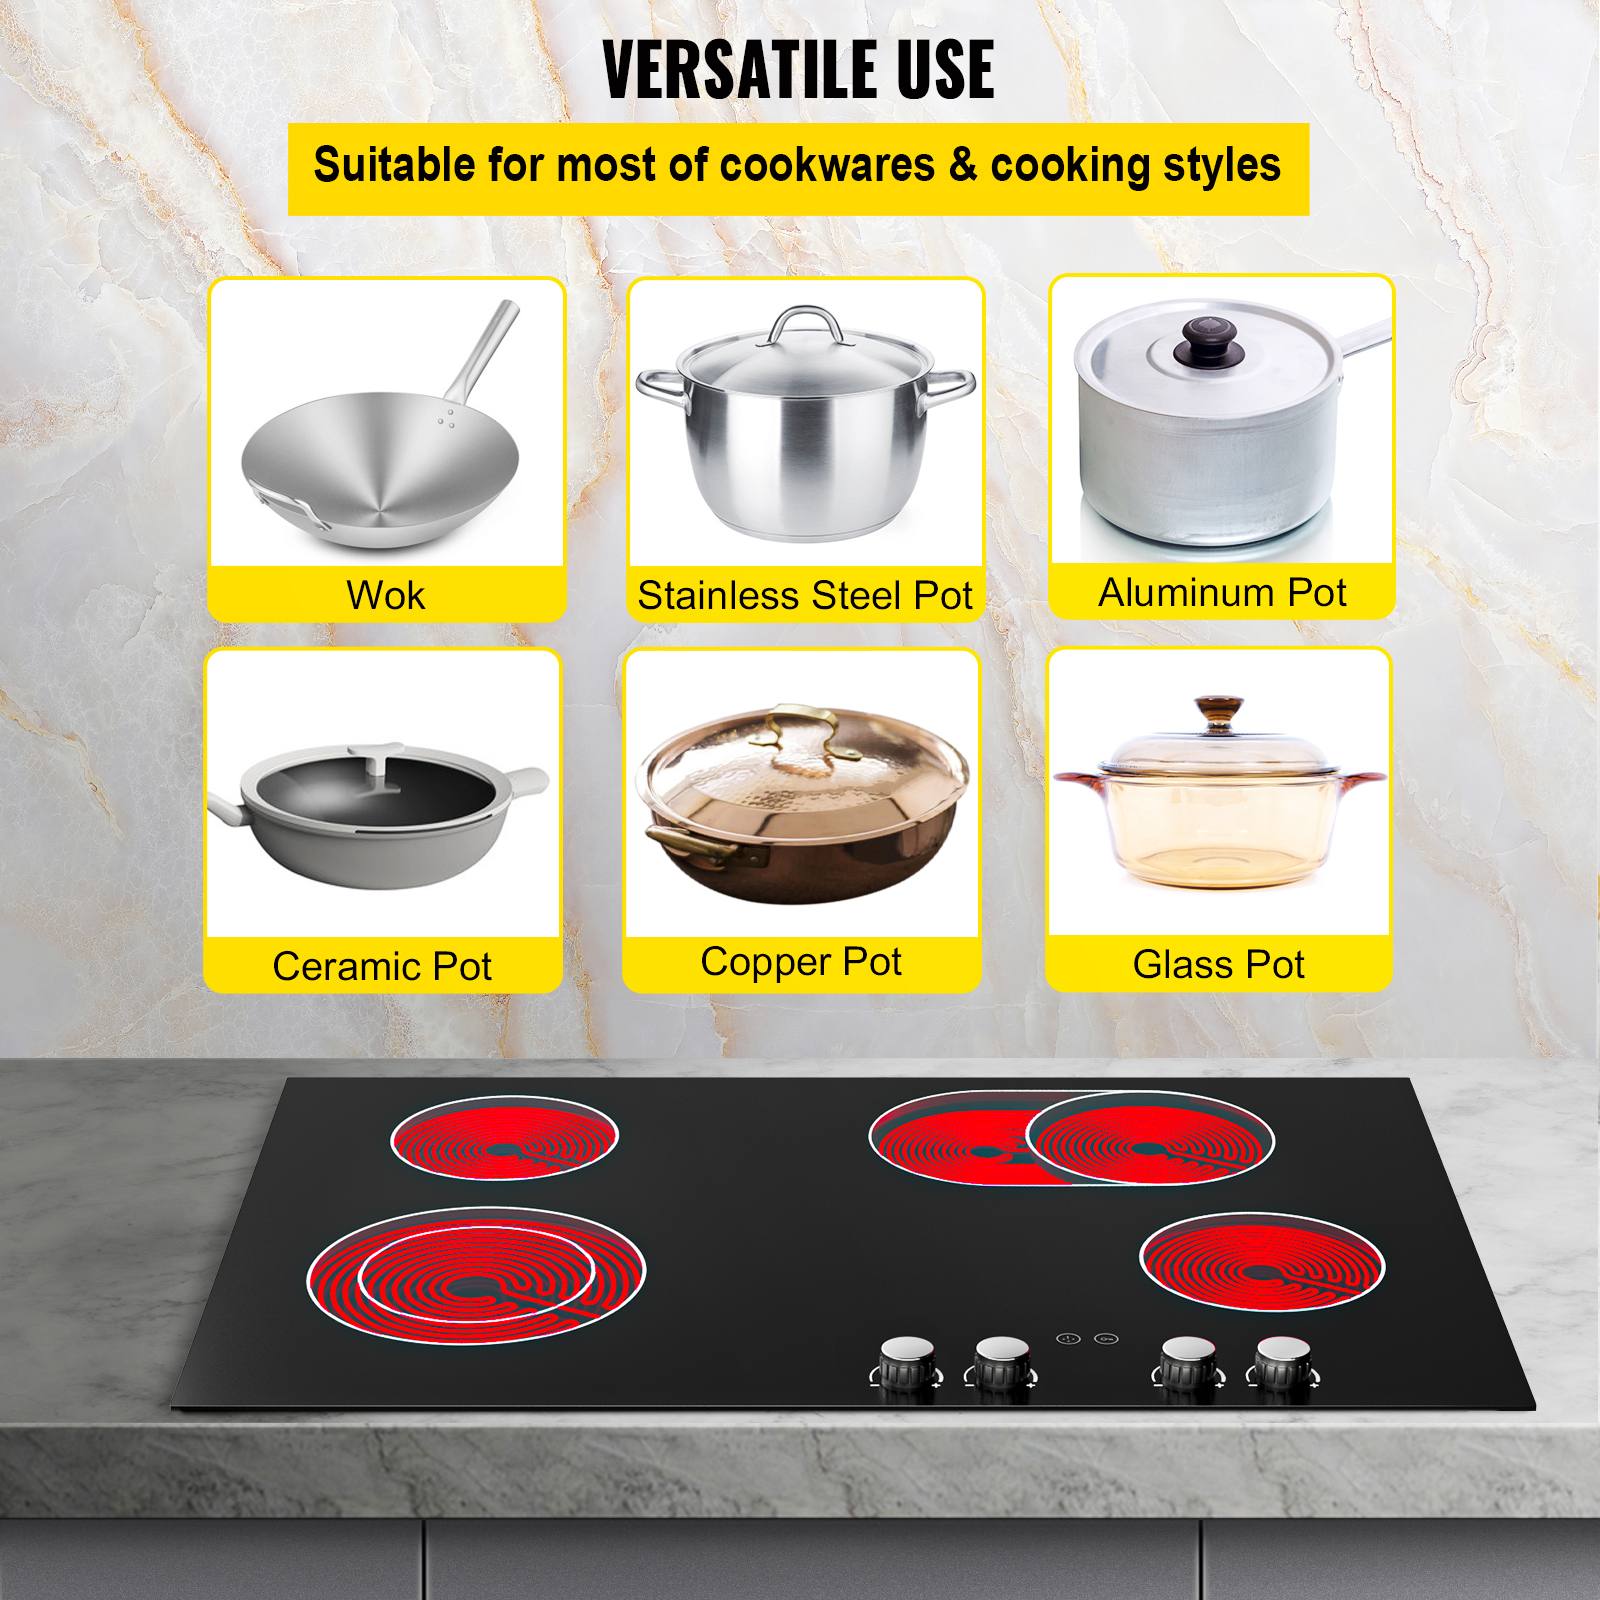 Induction vs electric cooktop: which is better?